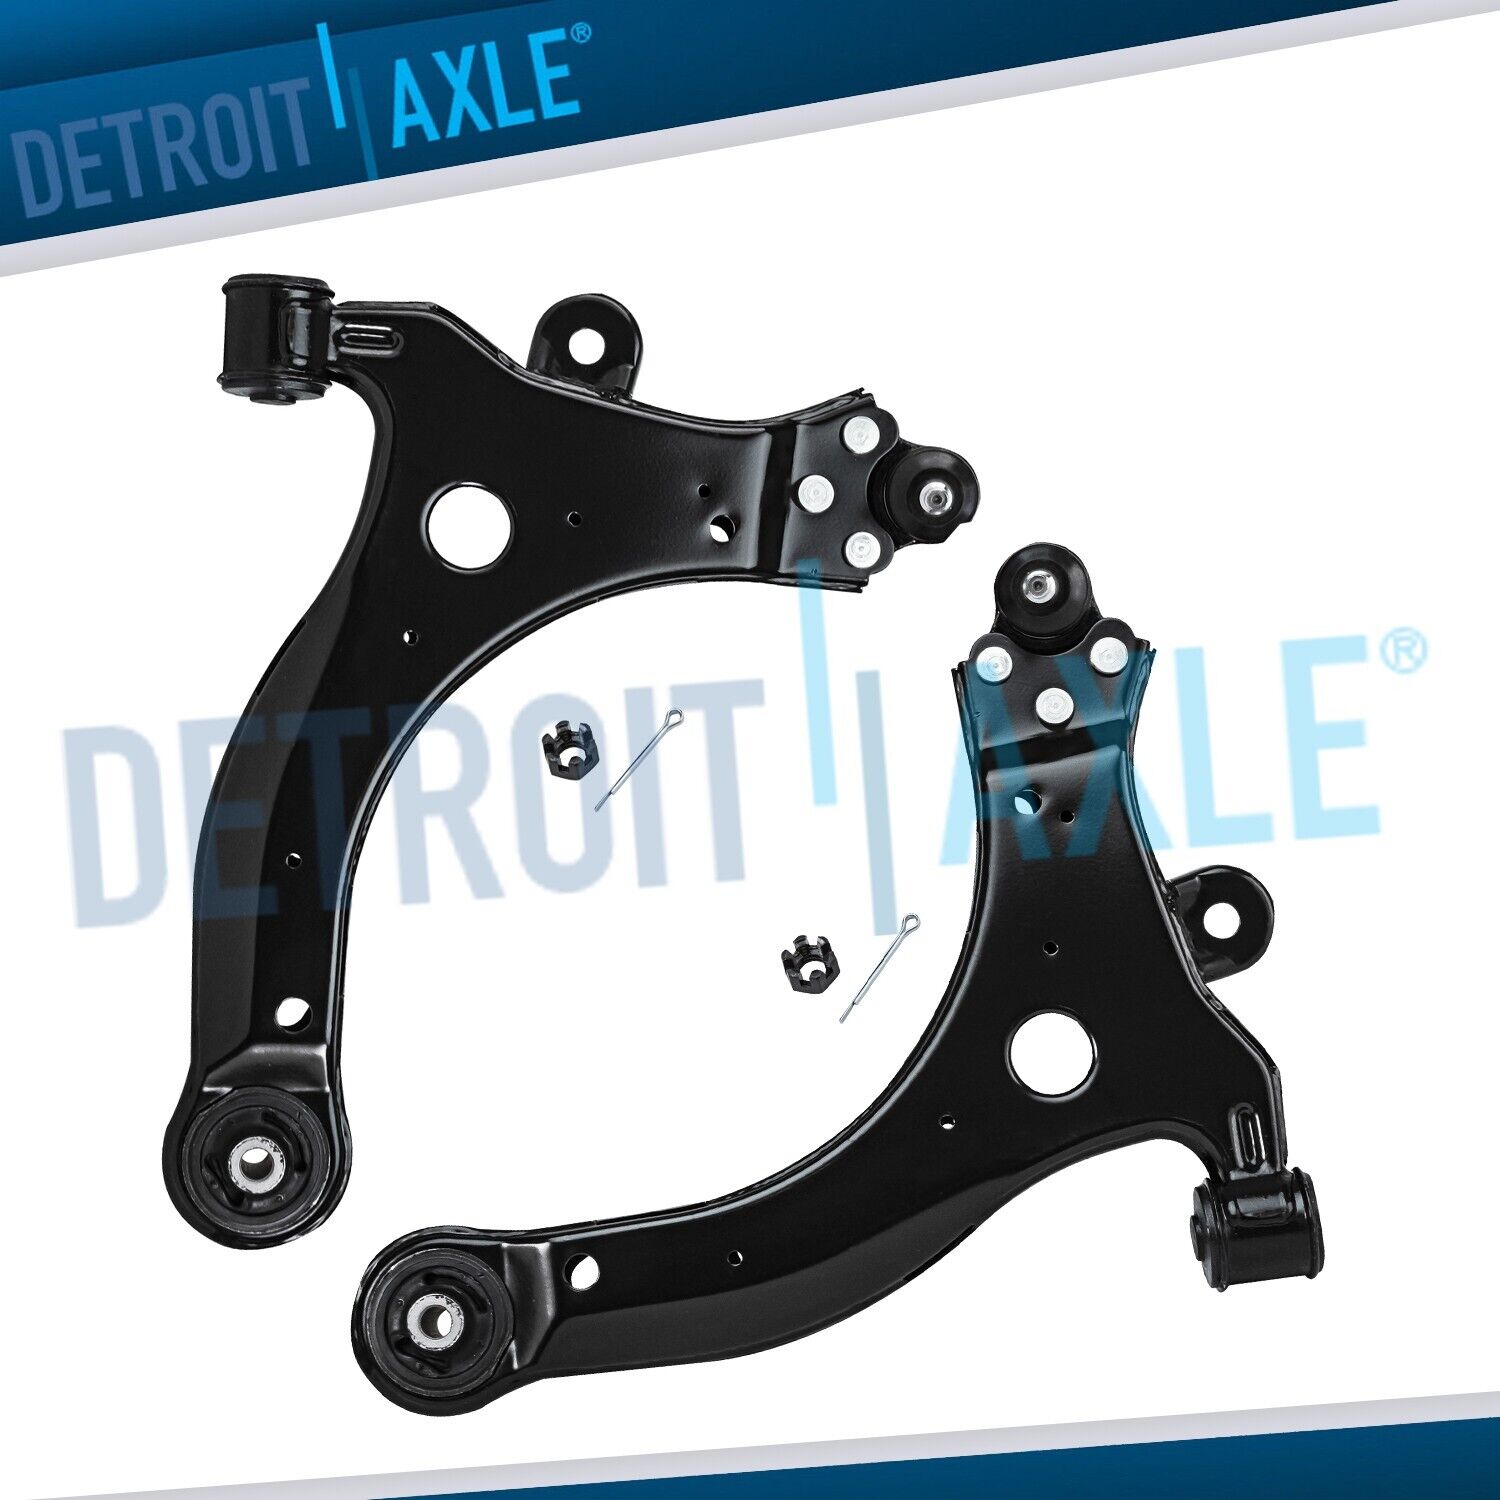 (2) Front Lower Control Arms w/ Ball Joints for Chevy Impala Venture Buick Regal